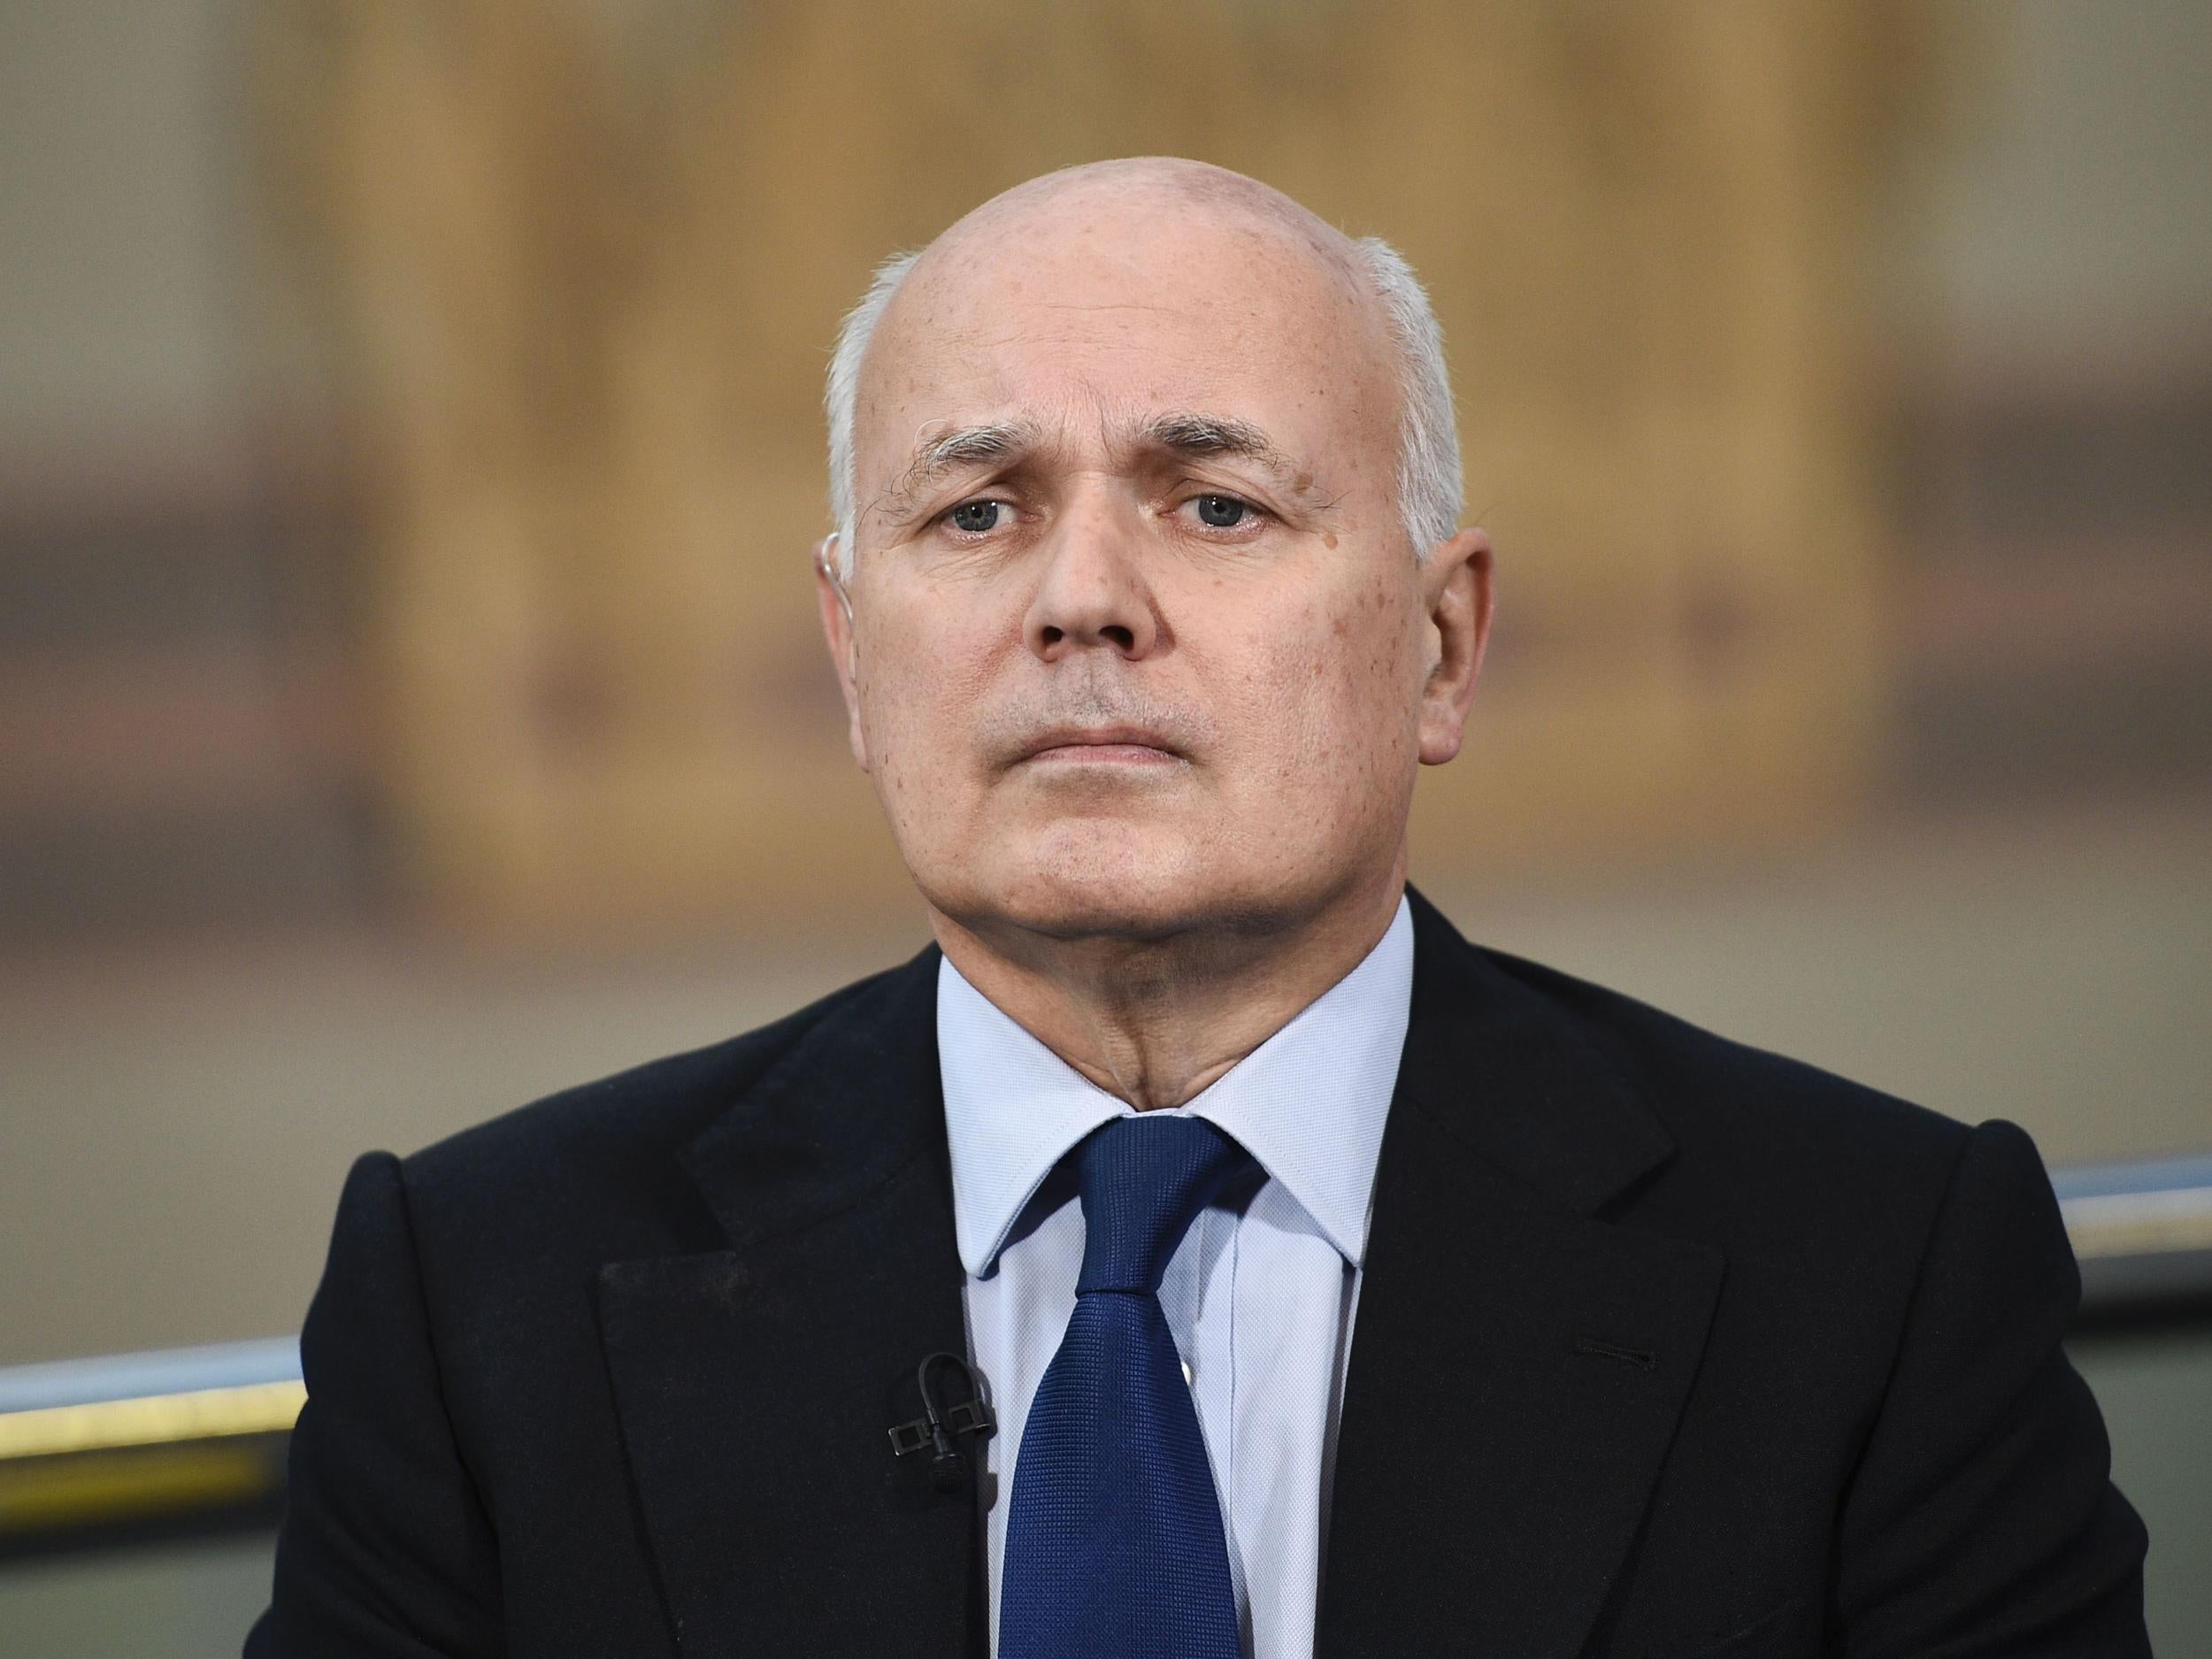 “It’s an incomplete report, the government has damned it, and I think therefore we should just push it to one side and say ‘yet another report’,” said Iain Duncan Smith